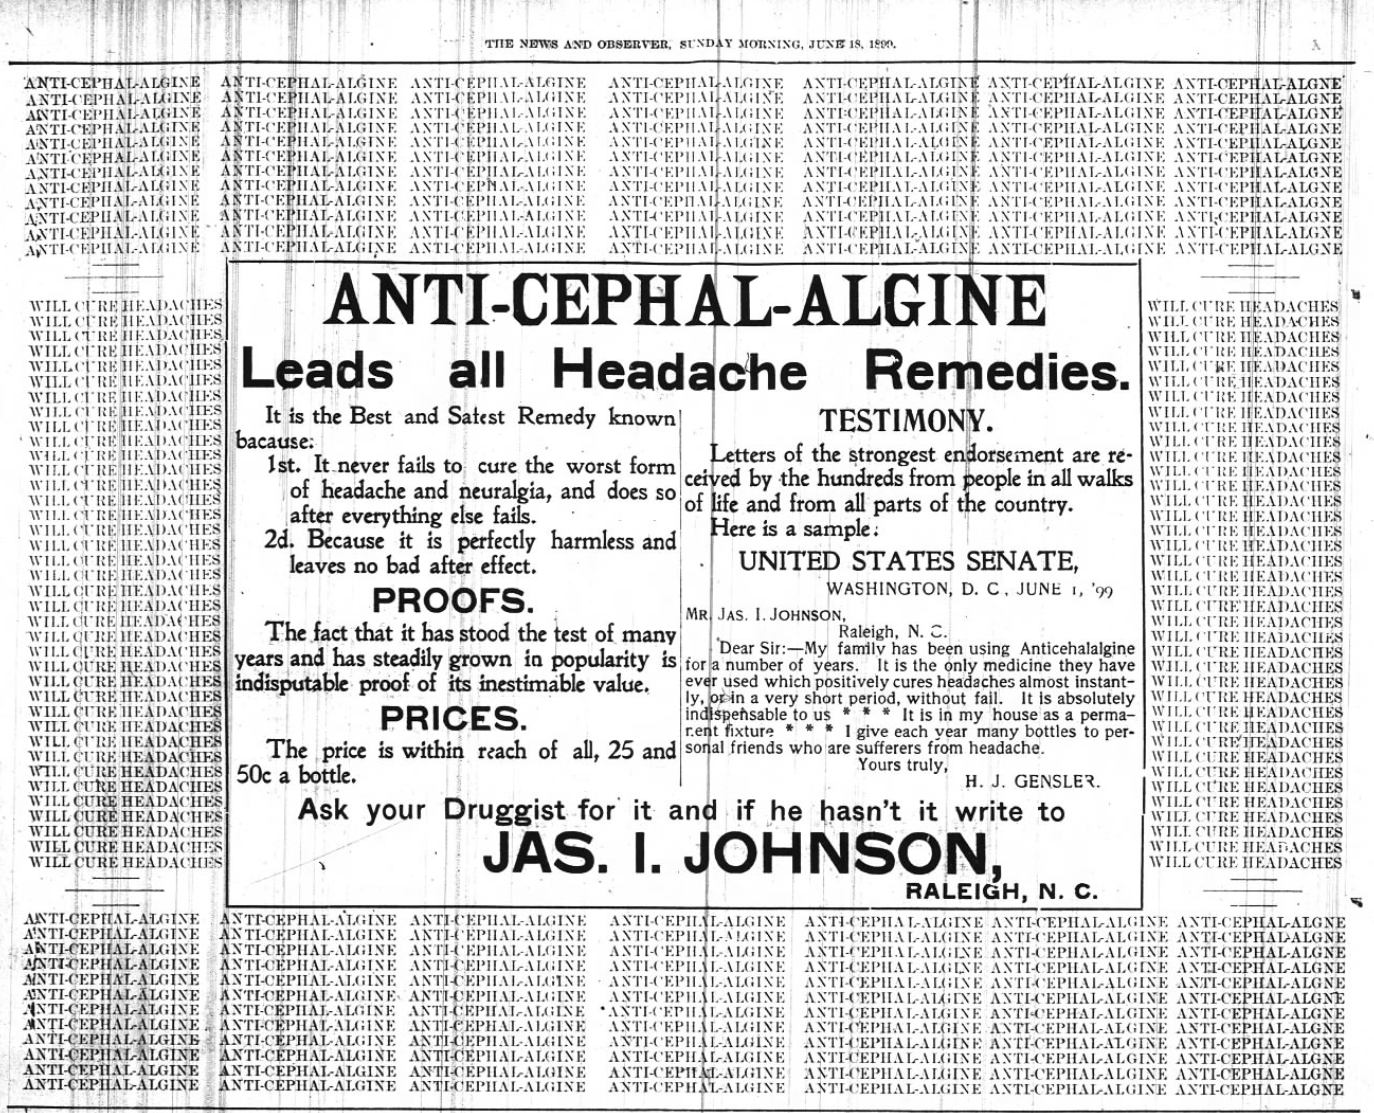 Kristin Holt | Victorian-American Headaches: Part 4. Anti-Cephal-Algine. Leads all Headache Remedies. A newspaper full-half-page advertisement in News and Observer of Raleigh, North Carolina on June 18, 1899.